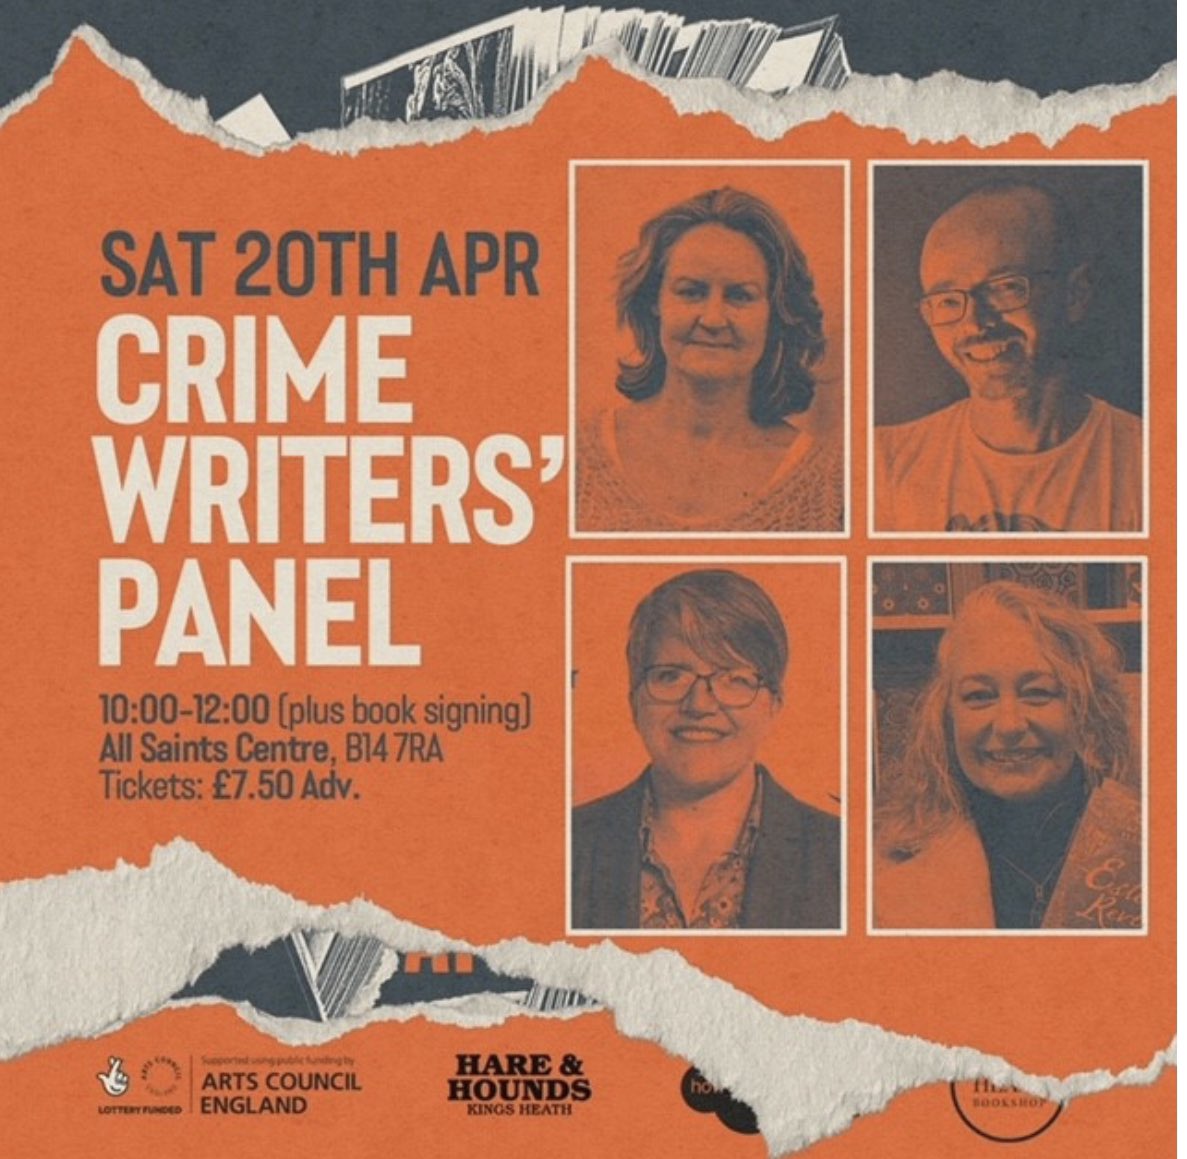 In 2 weeks the wonderful Heath Bookshop will be holding their first music & literature festival in Kings Heath, Birmingham. I will be on a crime panel with fellow Brummies @mredwards @BCopperthwait and Rachel McLean on Sat 20th April - tickets here! the-heath-bookshop.eventcube.io/events/56765/c….